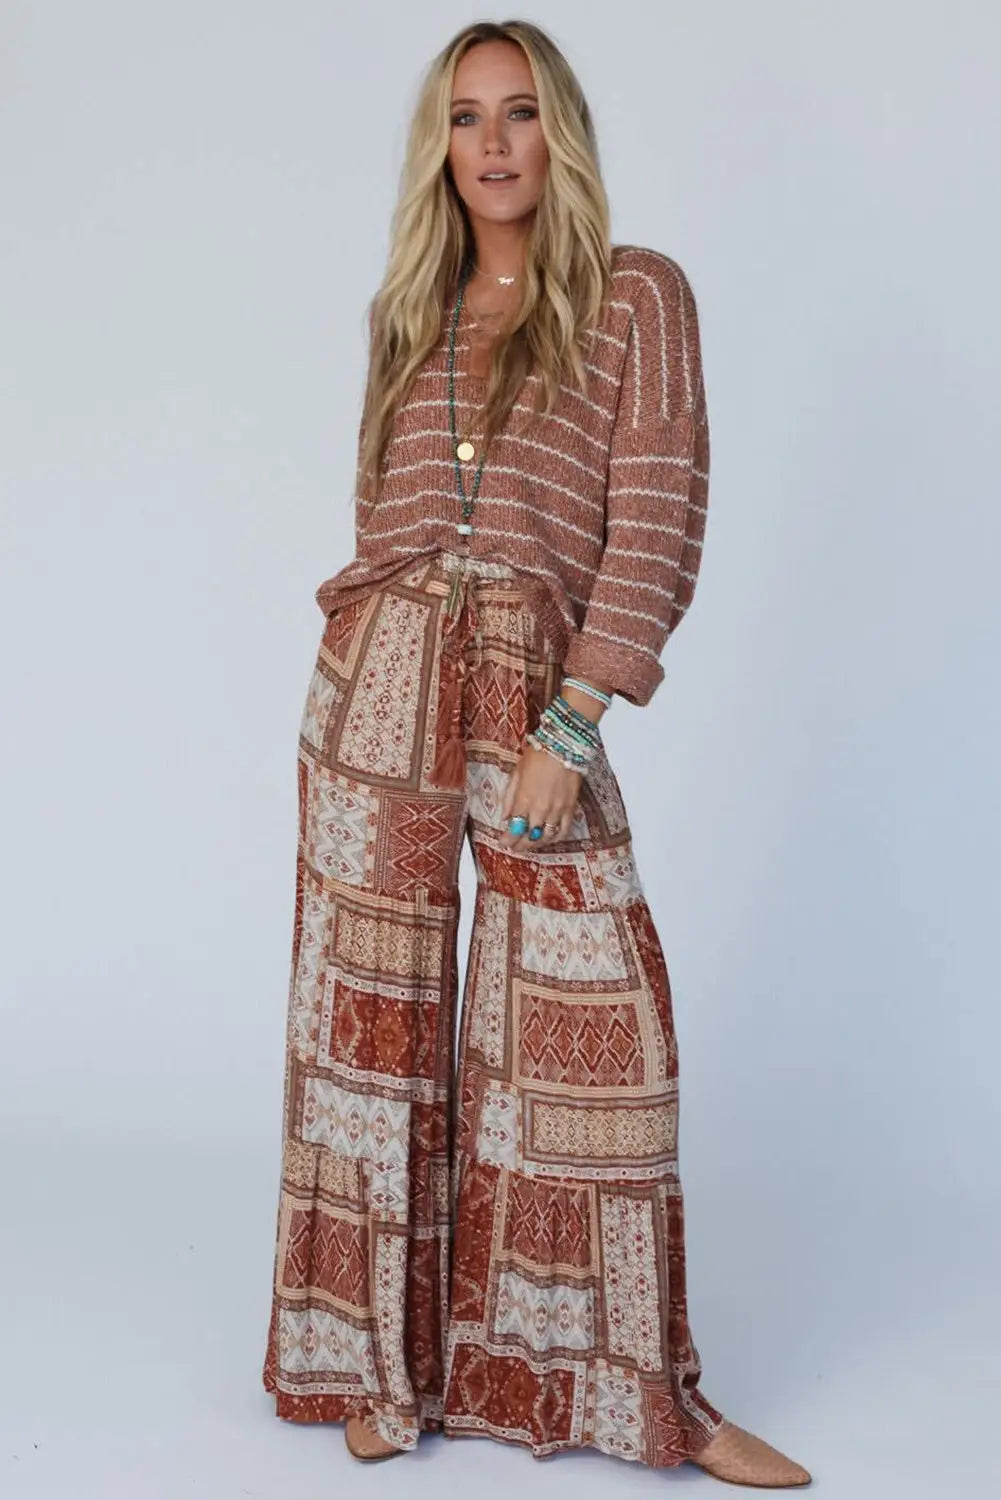 Brown boho aztec print tiered palazzo pants - trousers